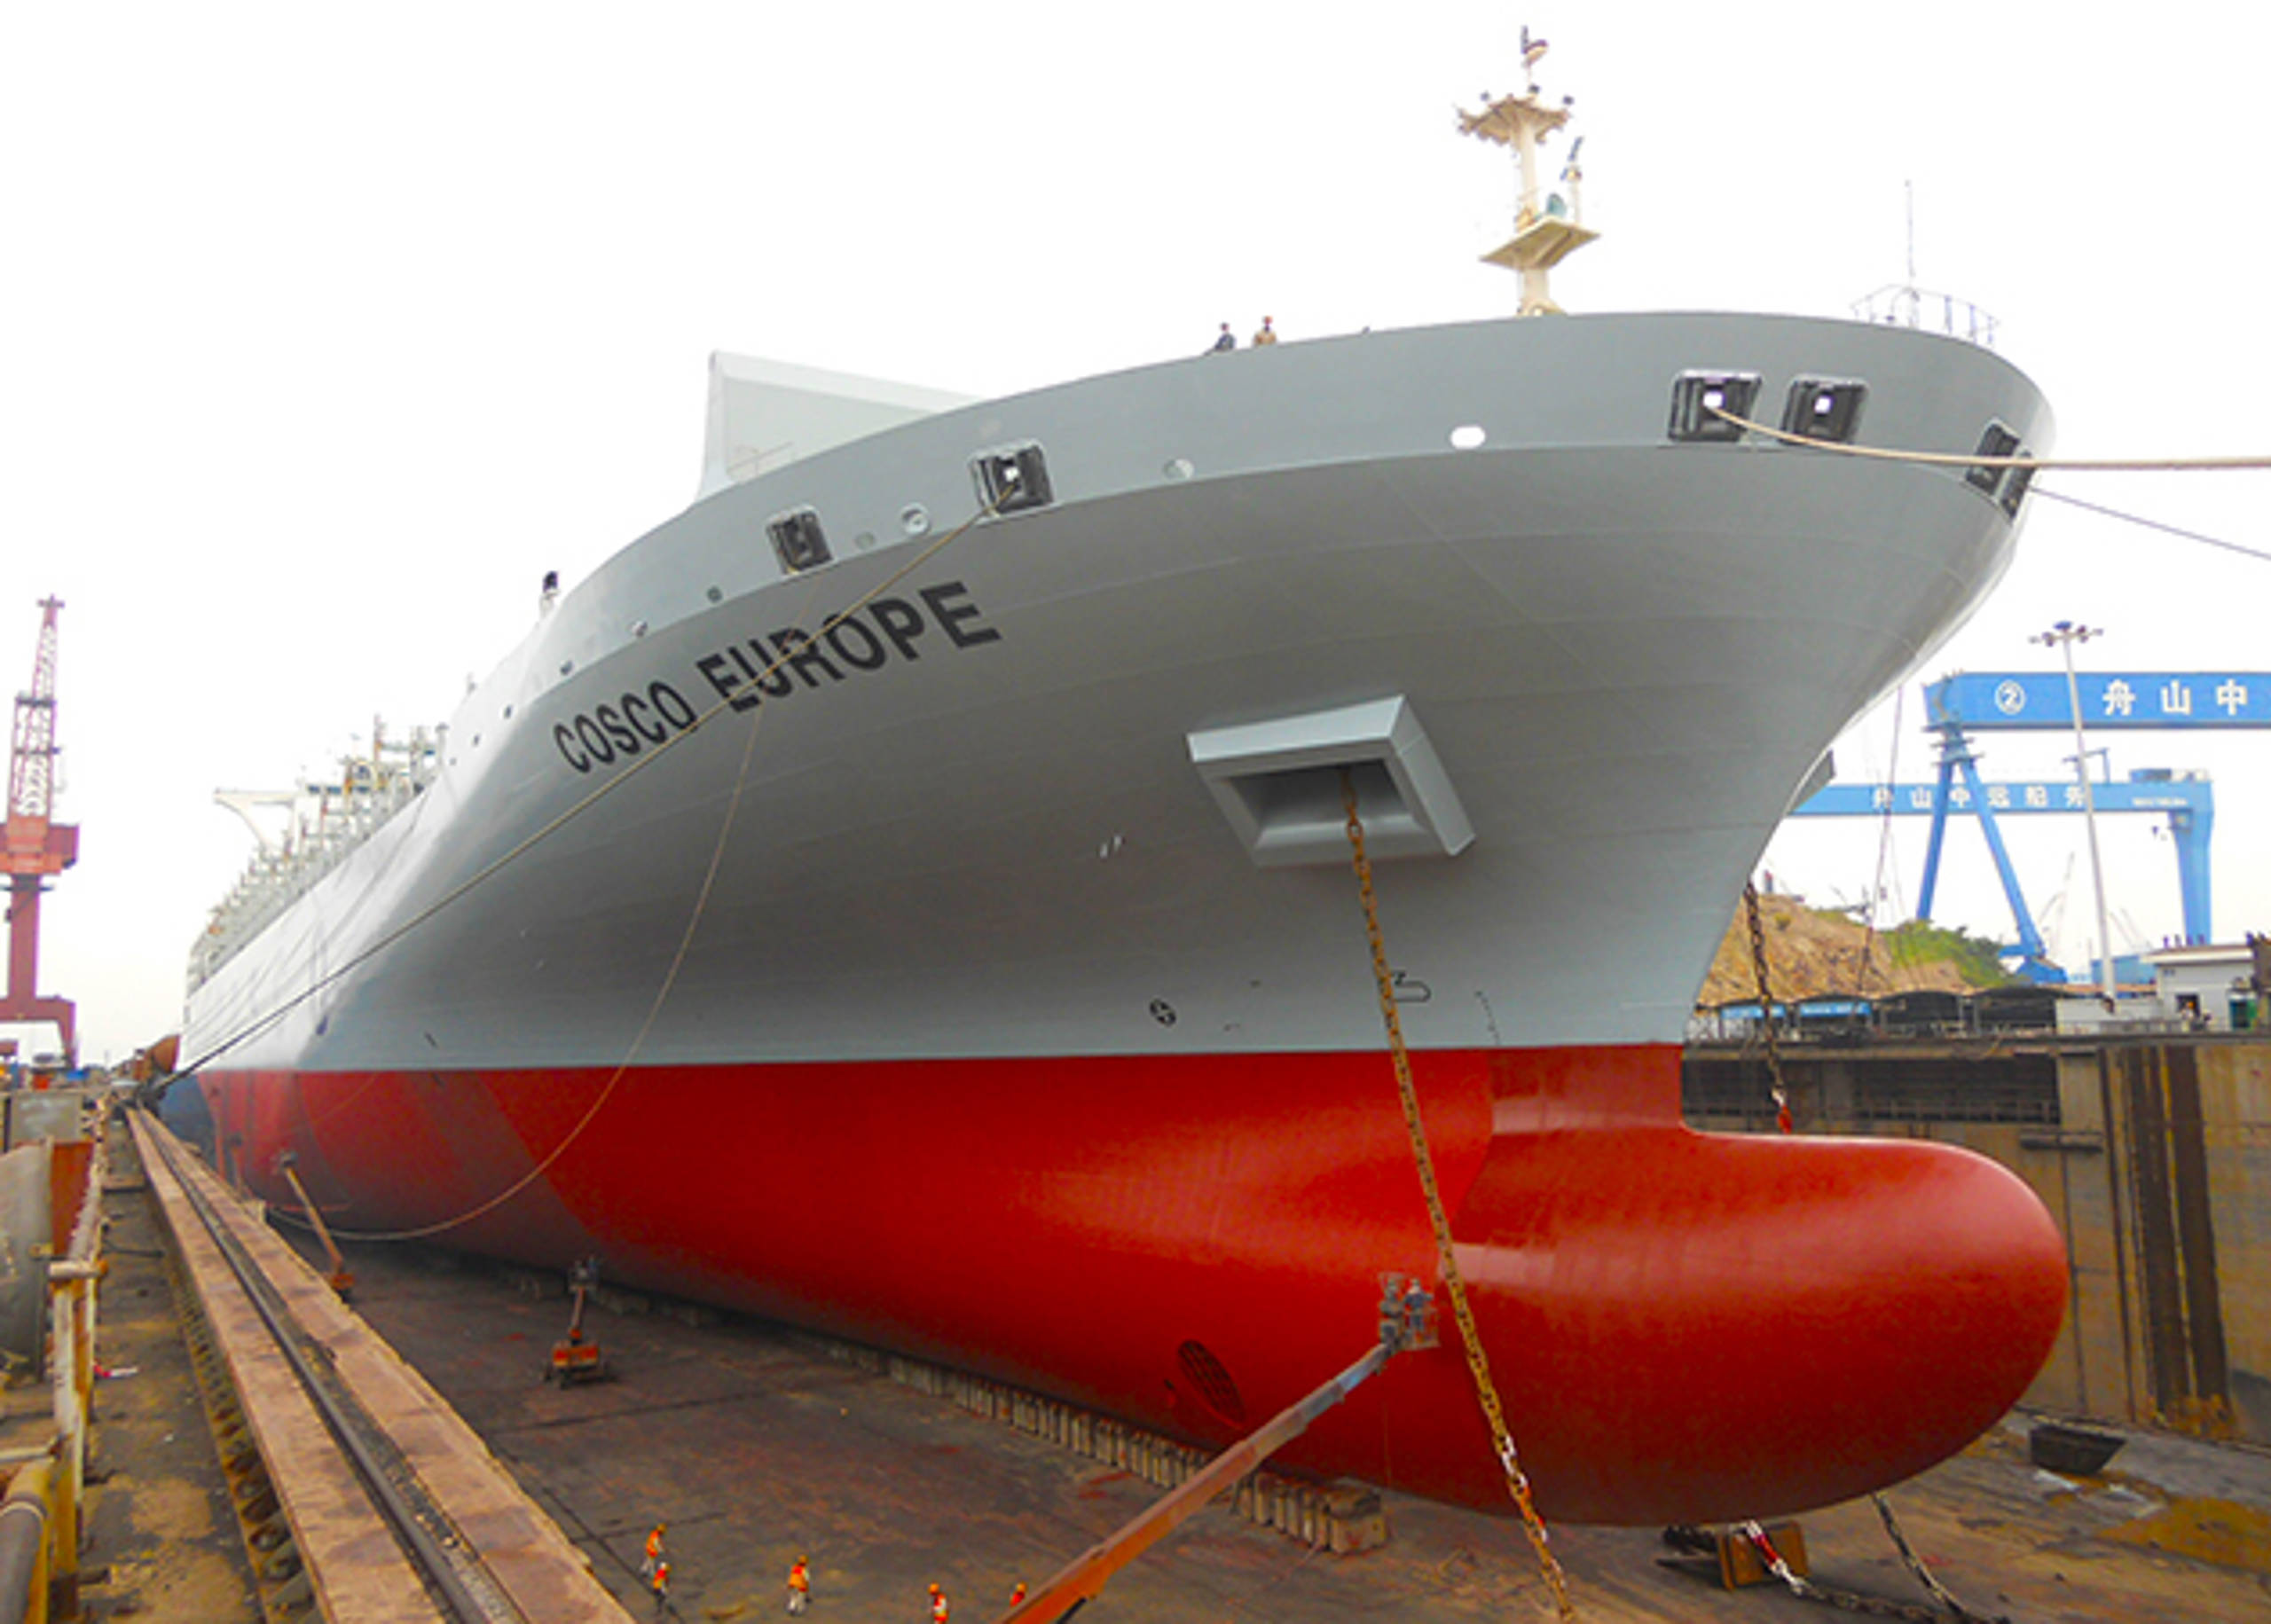 The container ship COSCO Europe in drydock – Jotun reference